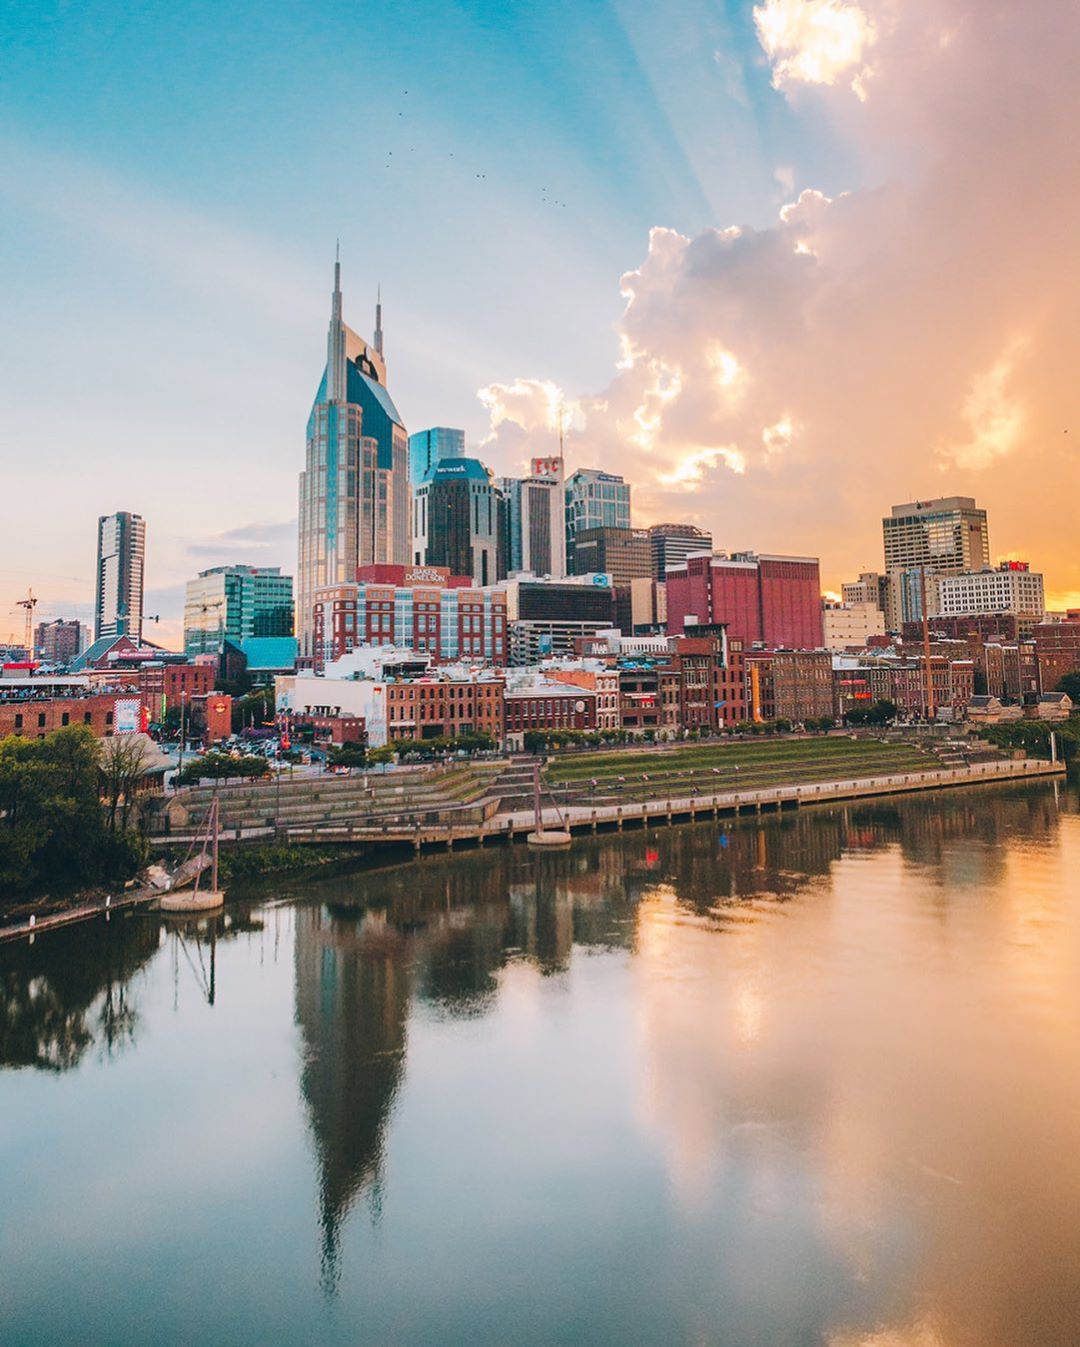 View of Downtown Nashville, TN. Photo by Instagram user @jakesvisuals